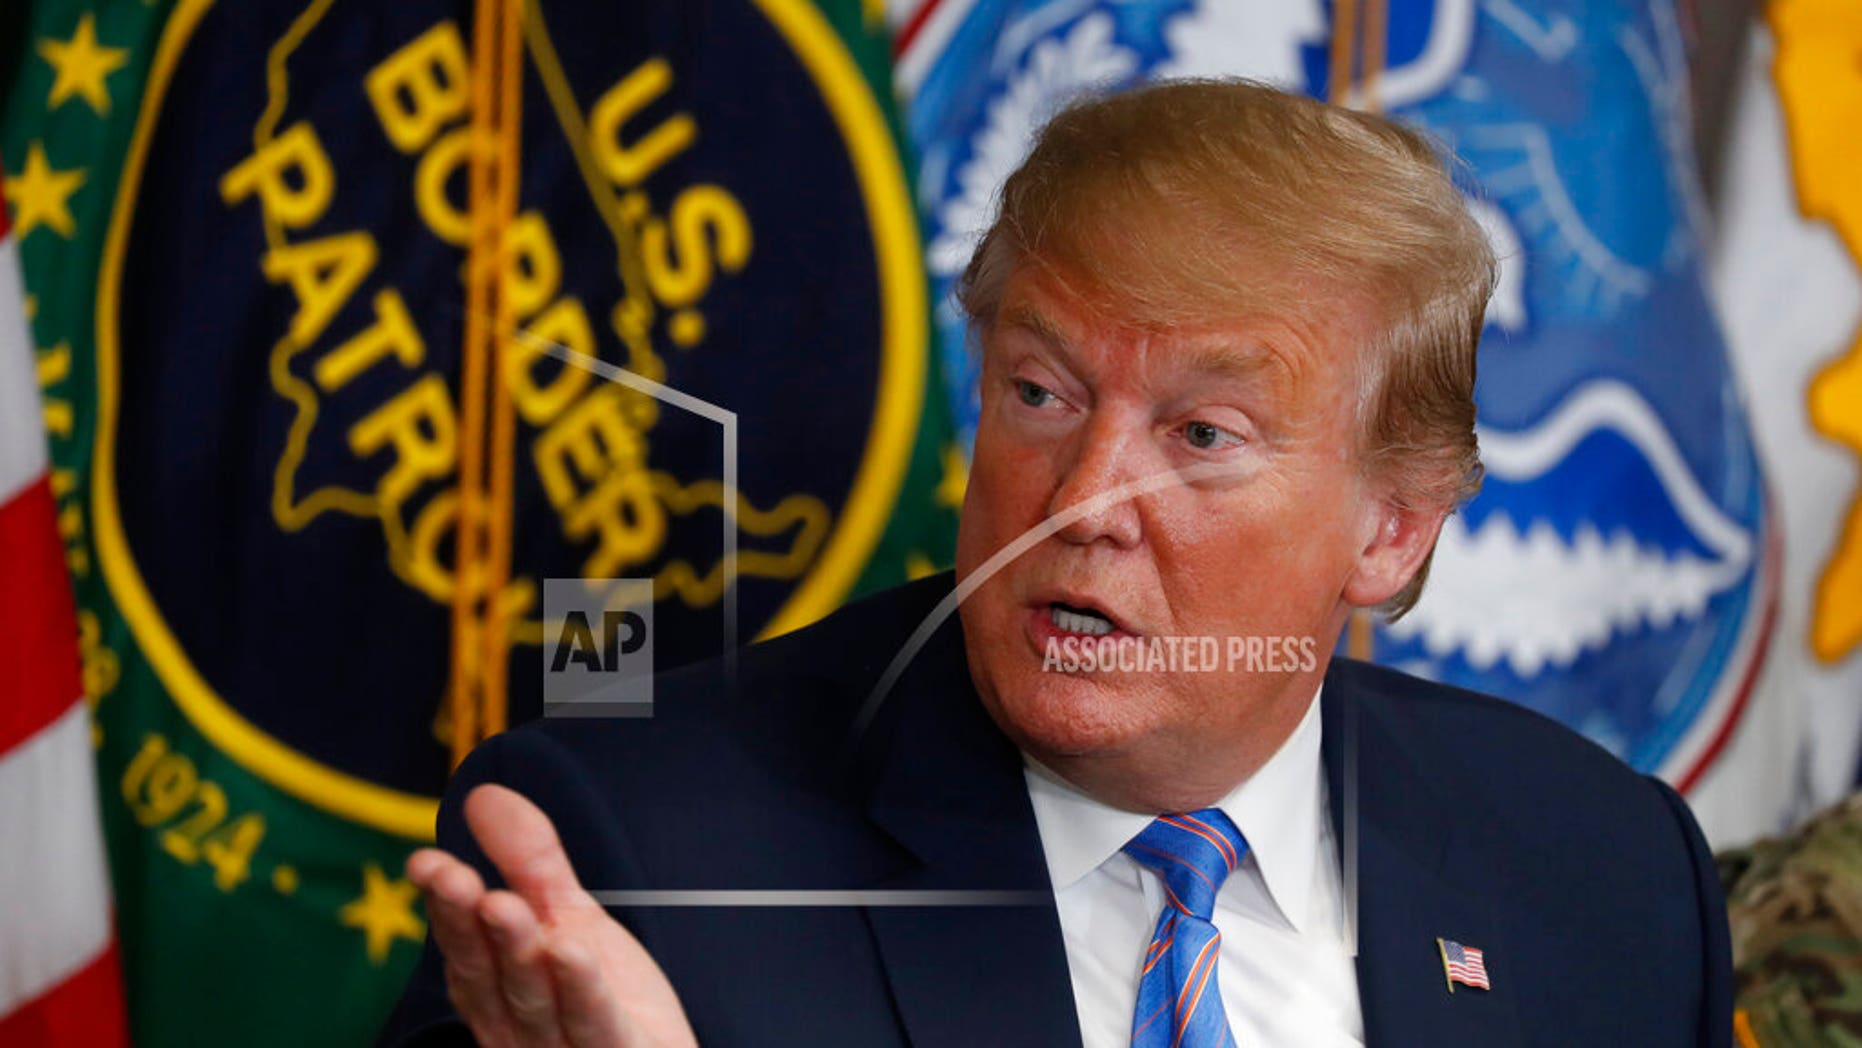 In this photo on April 5, President Donald Trump participates in a round table on immigration and border security at the Calexico station of the US border police in Calexico, California. Trump said on Friday 